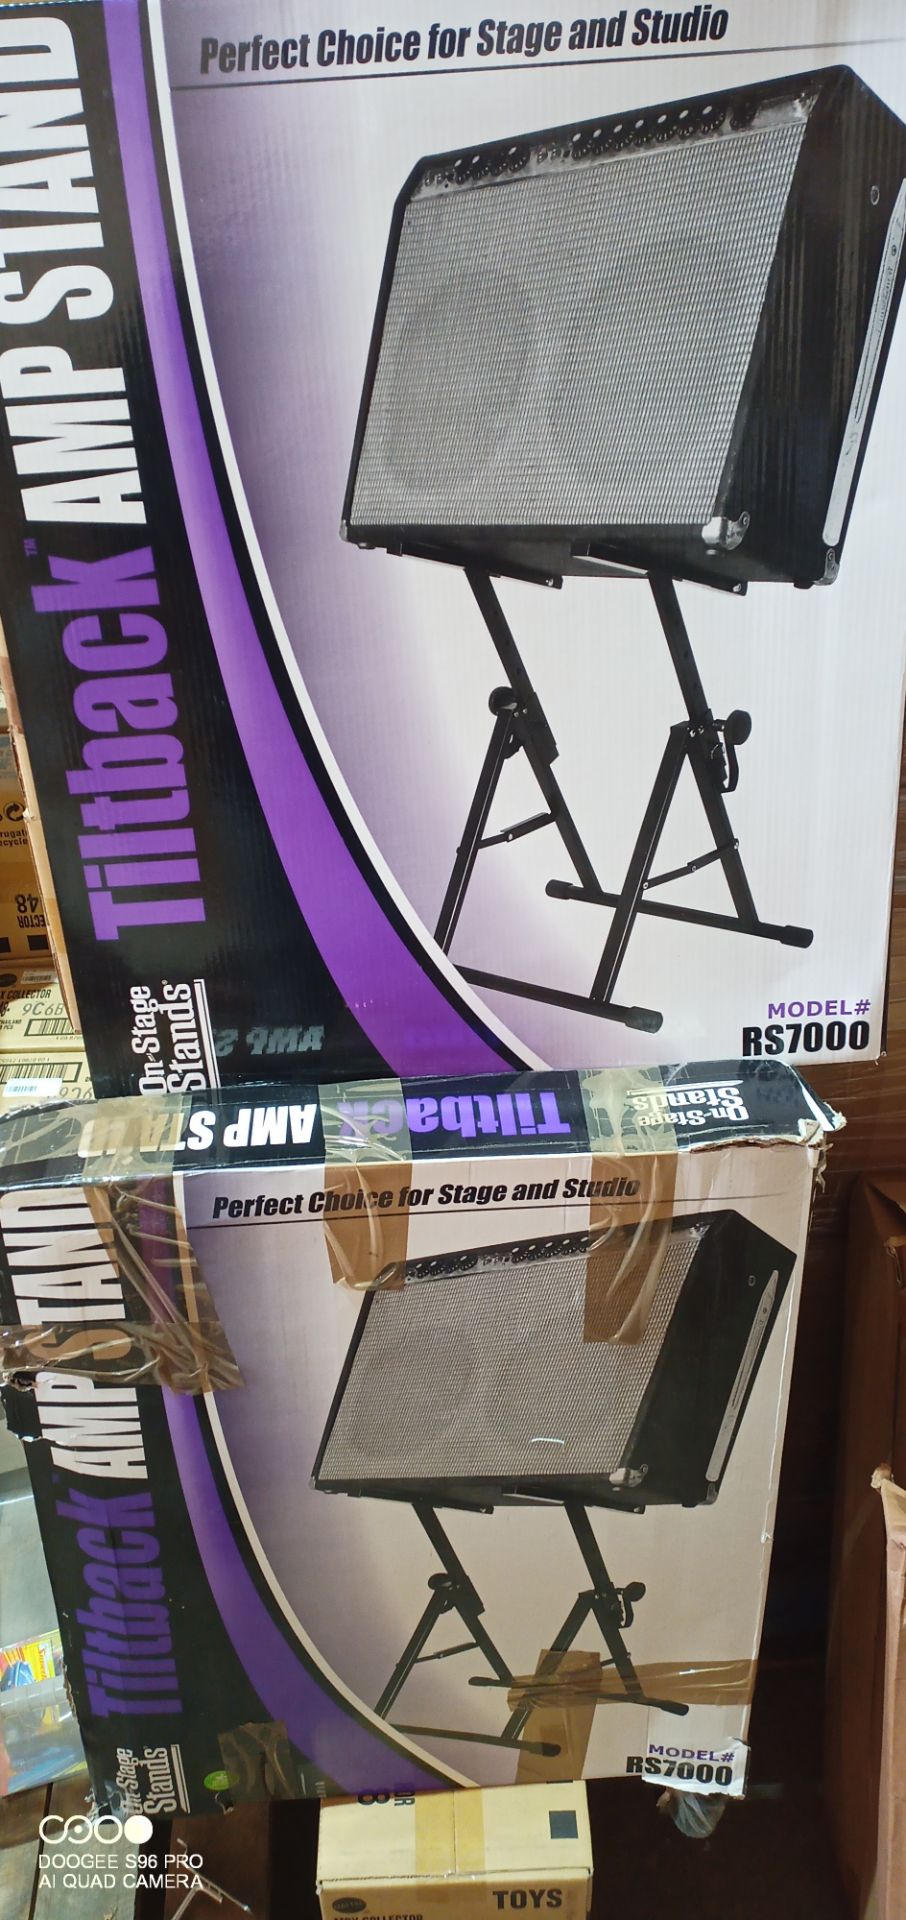 2. music stands as pictured - look new unused possible damage packaging